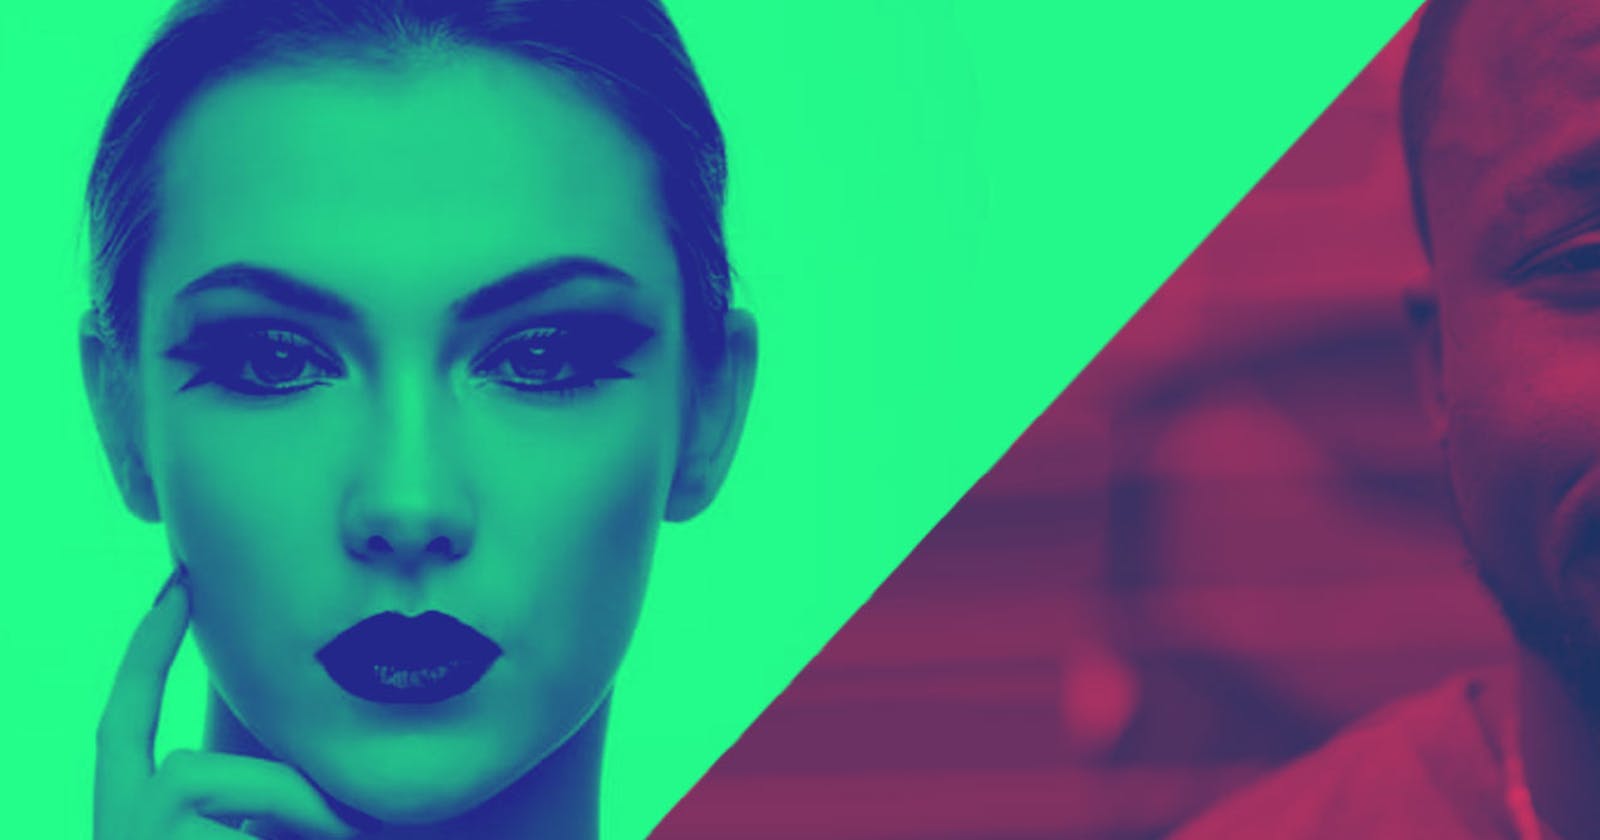 How to Create Spotify Colorizer Effects With CSS Blend Modes - Web Designer Wall - Design Trends and Tutorials